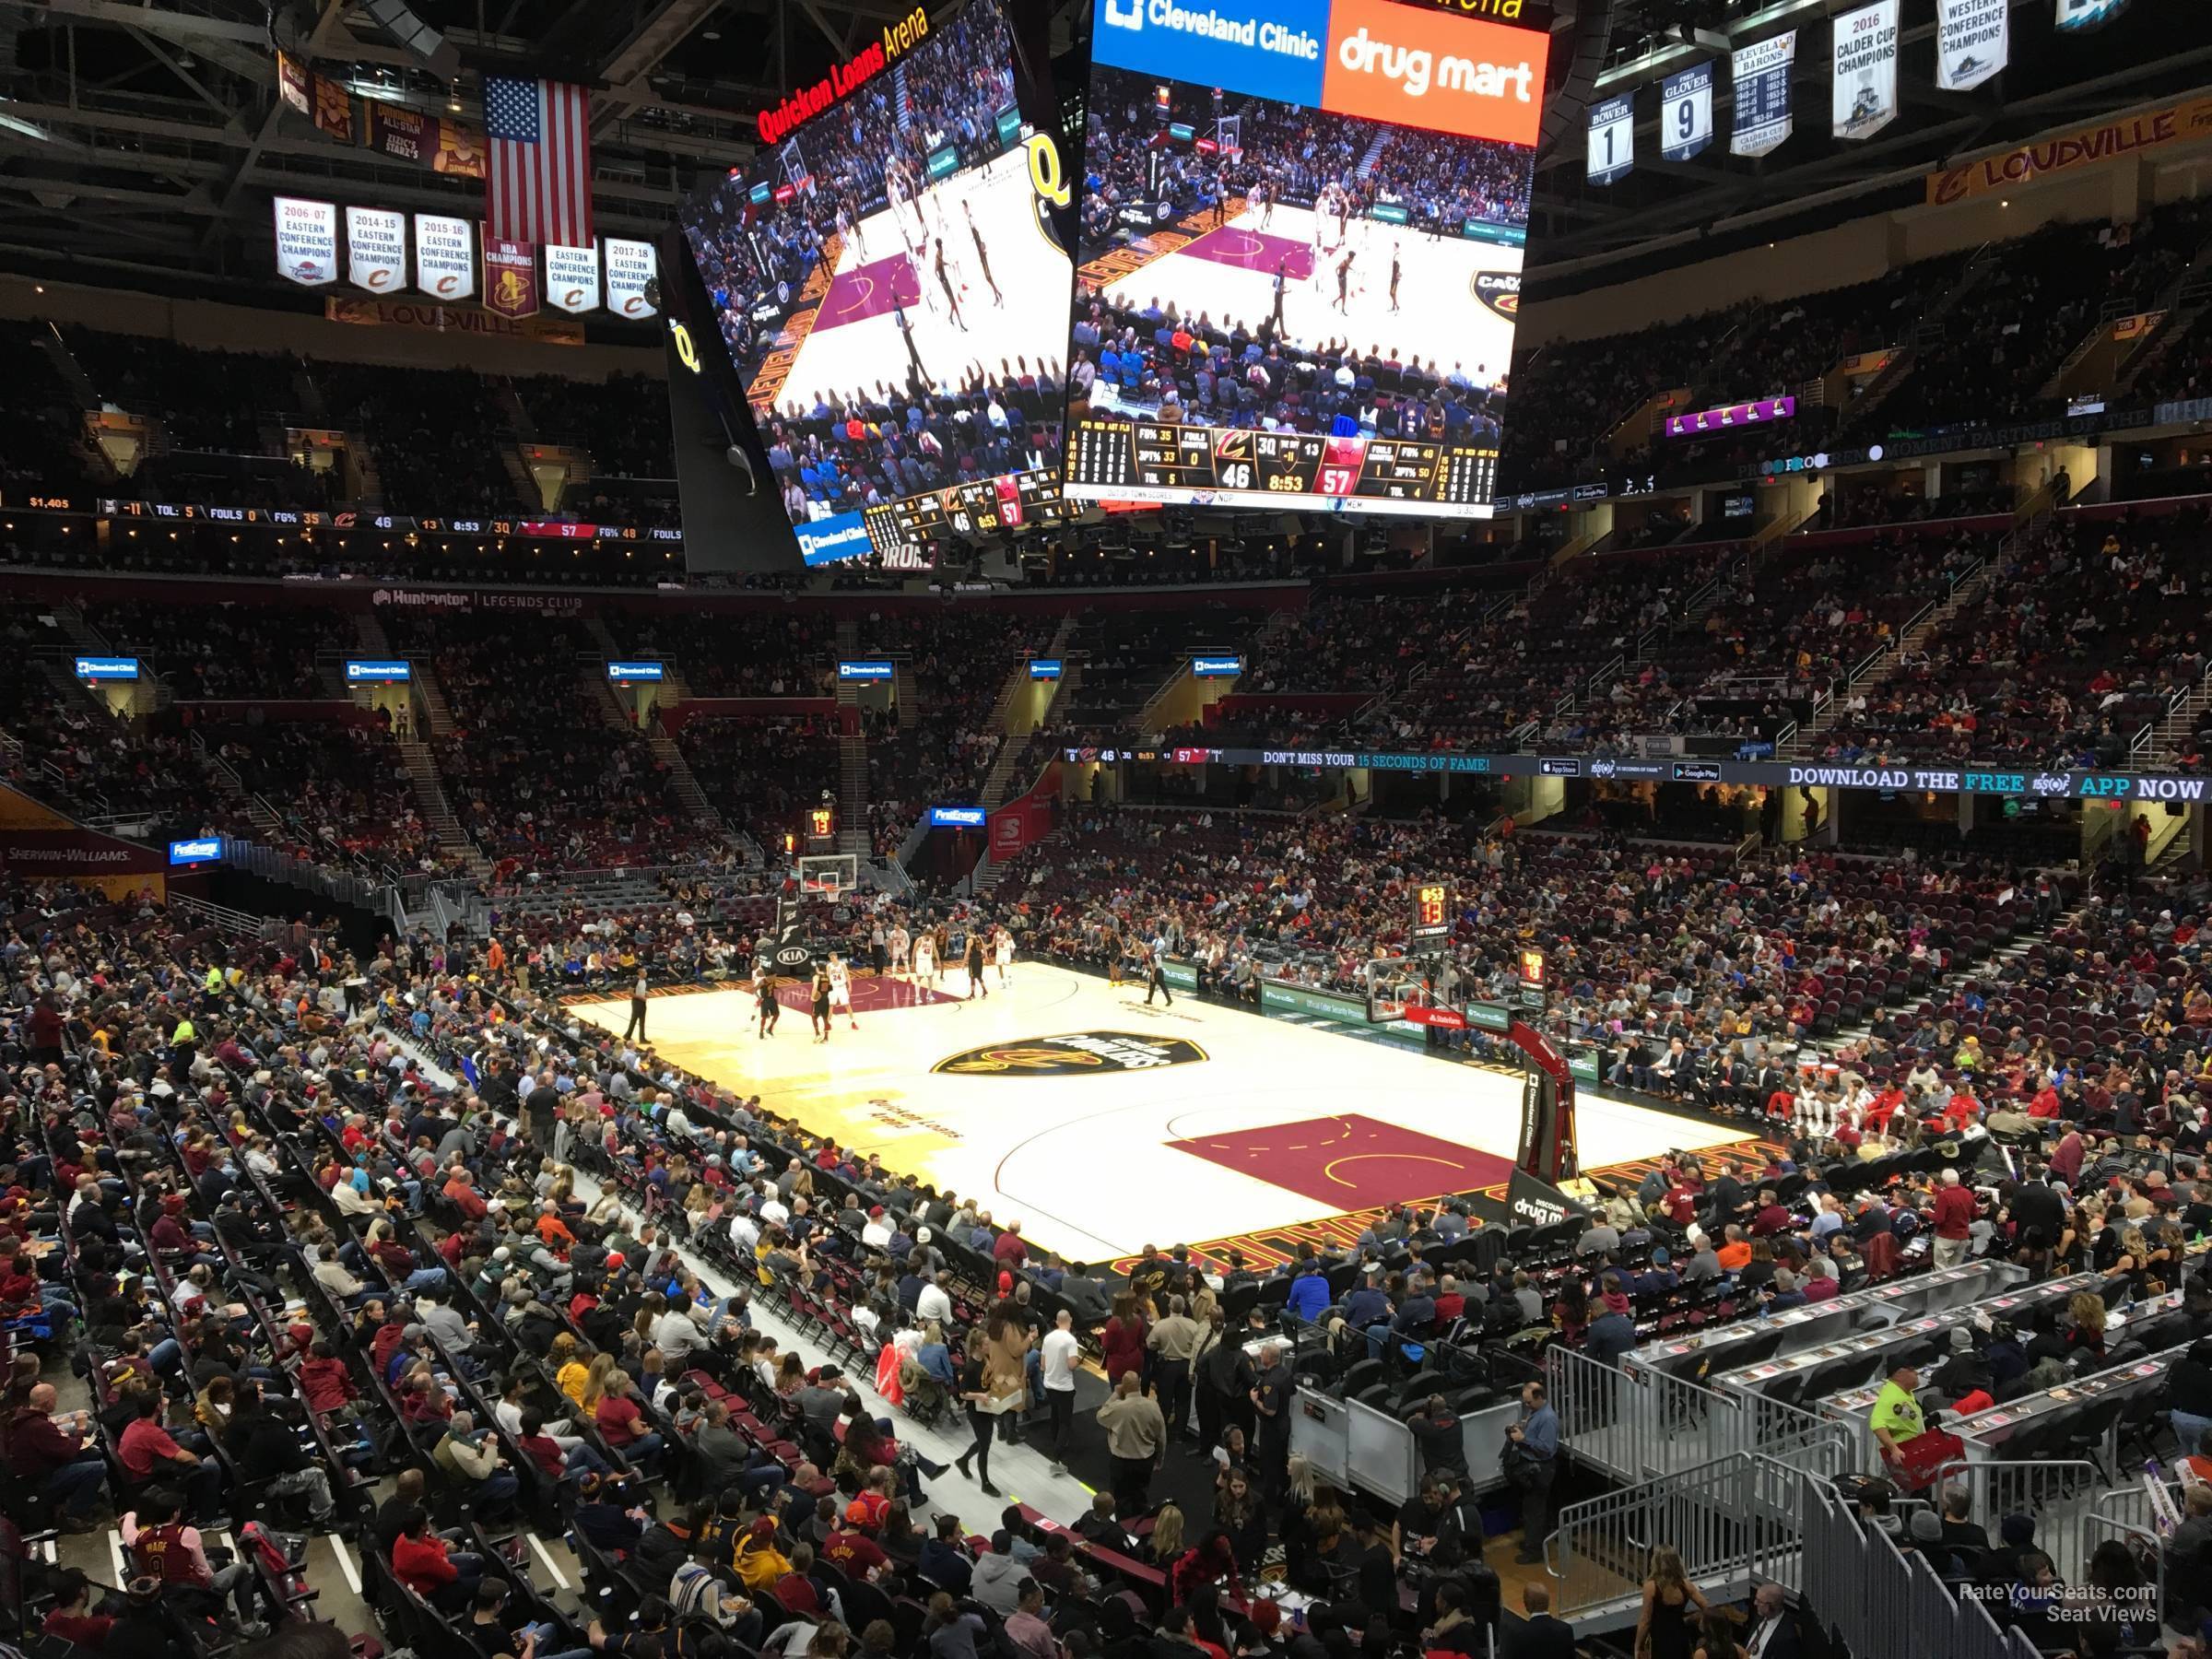 section m116, row 1 seat view  for basketball - rocket mortgage fieldhouse